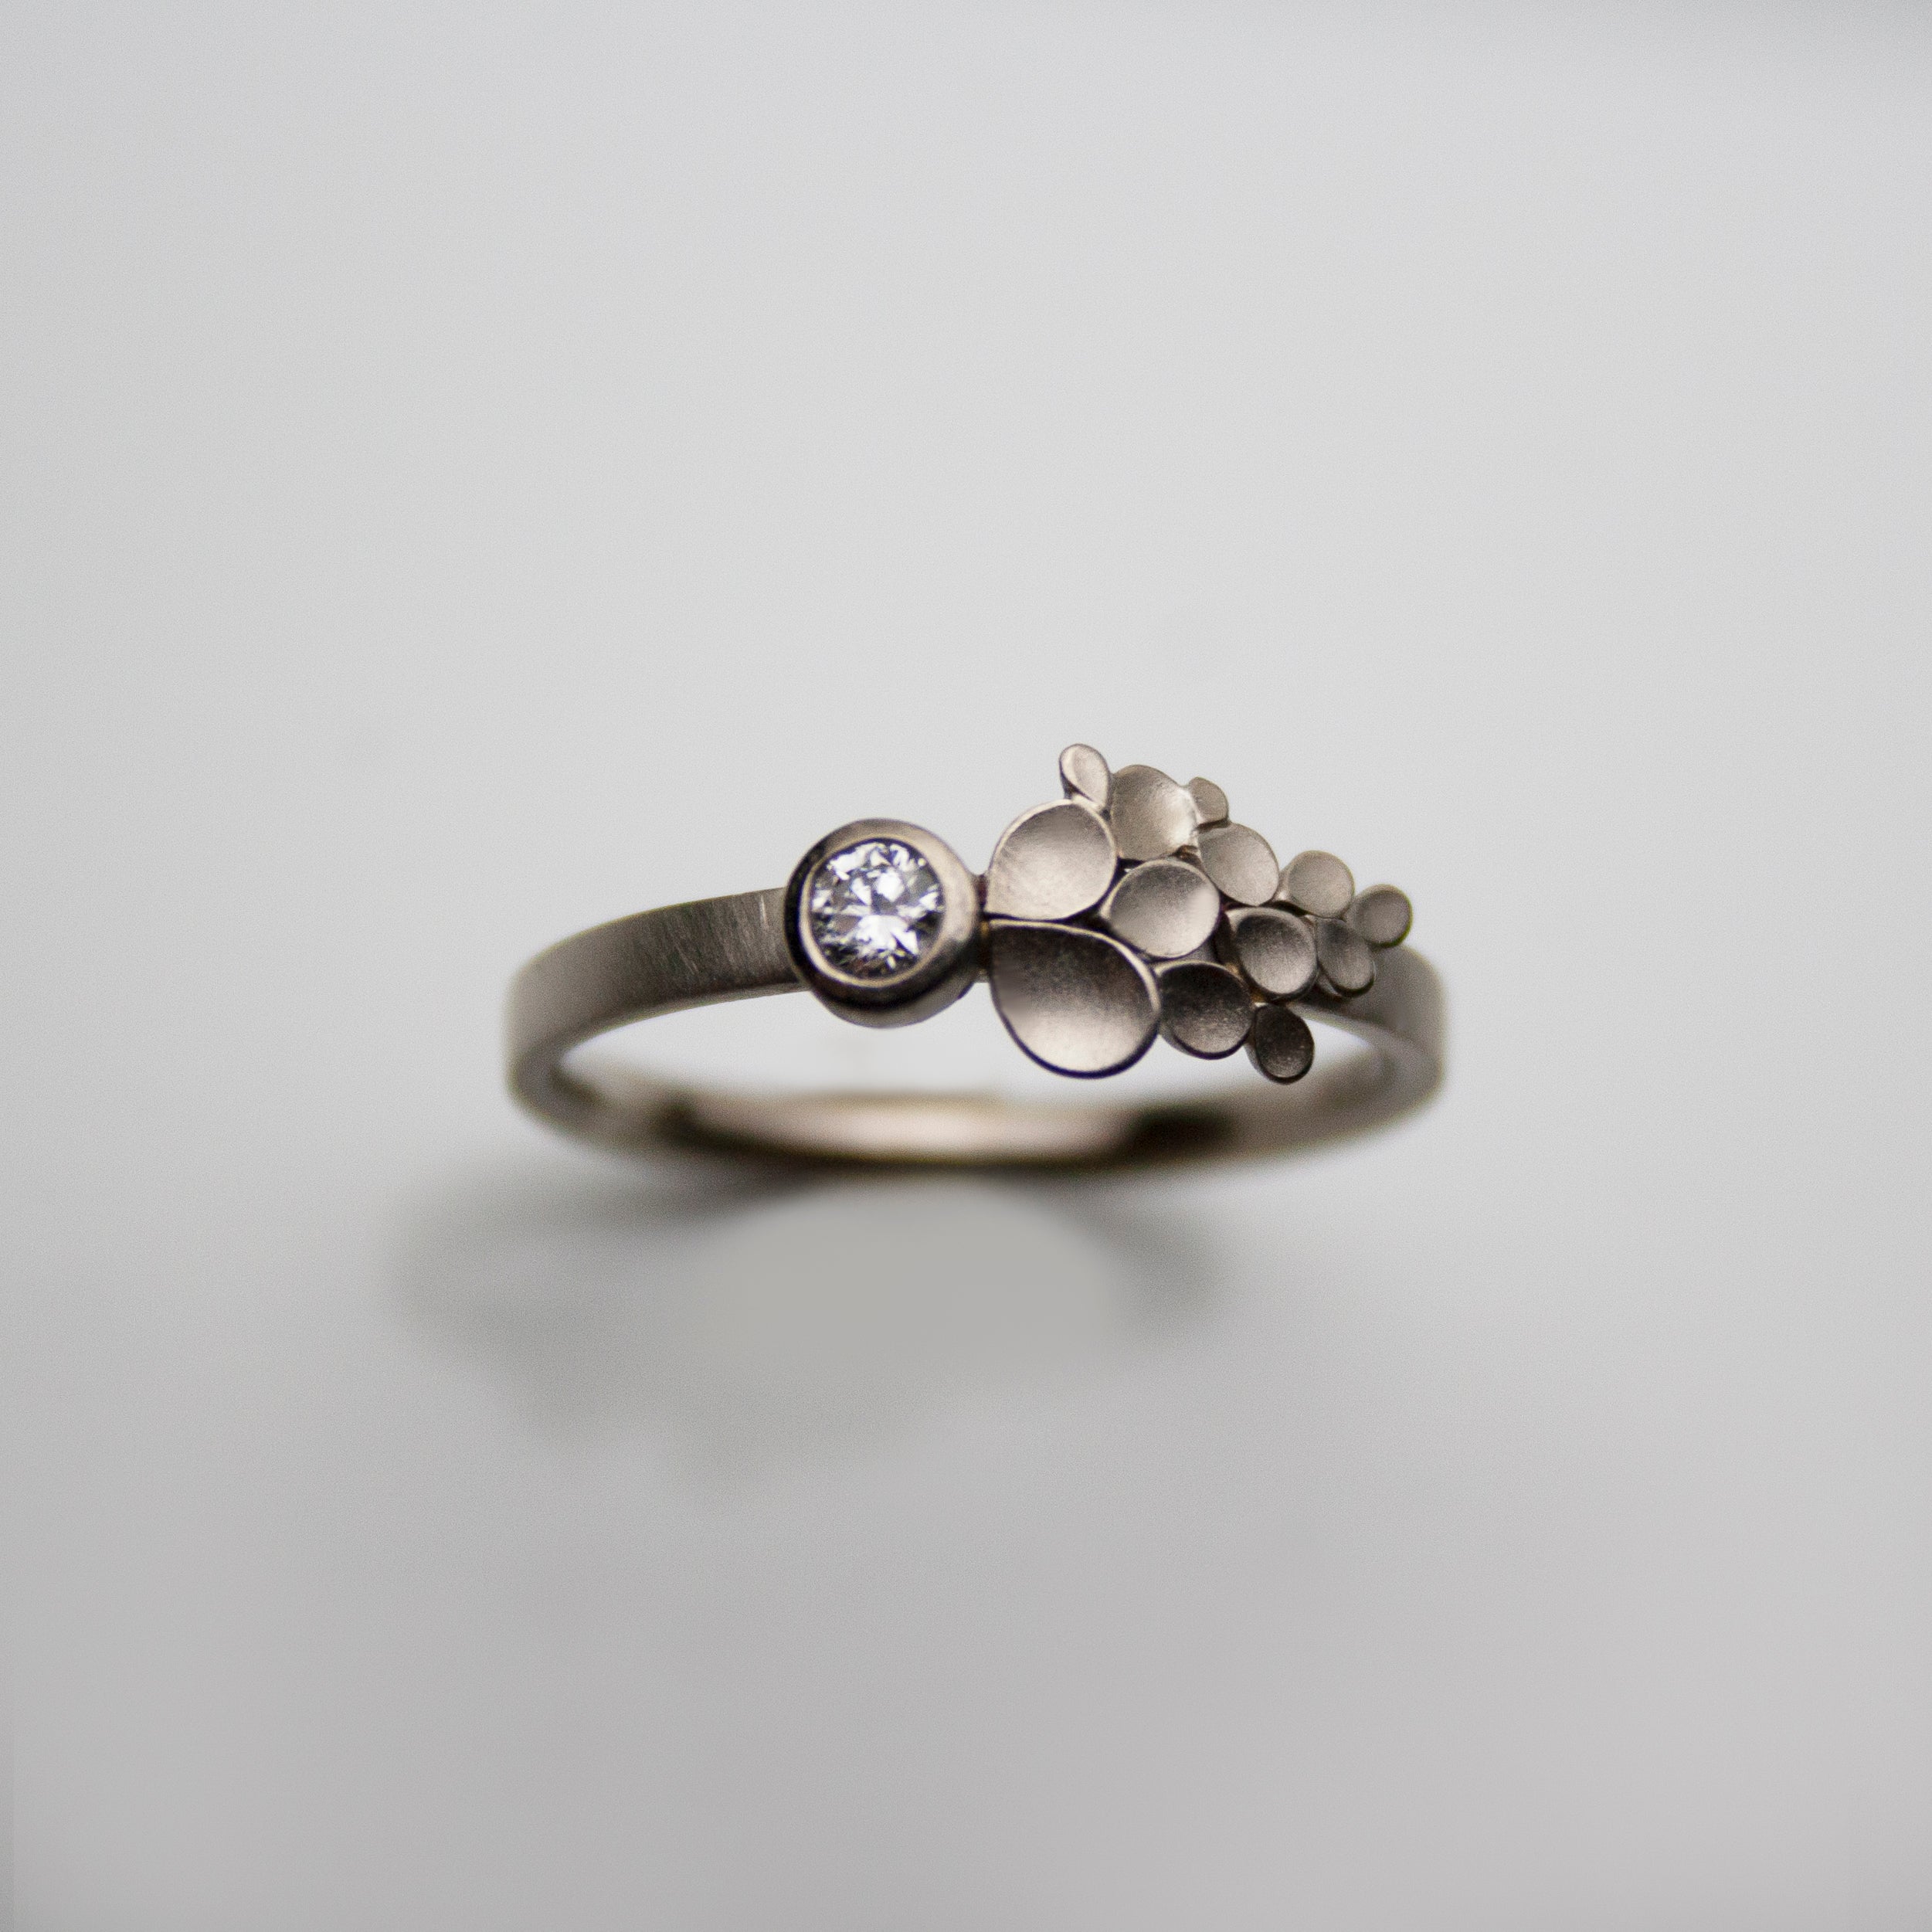 Wisteria 18ct. white Gold and Diamond Ring